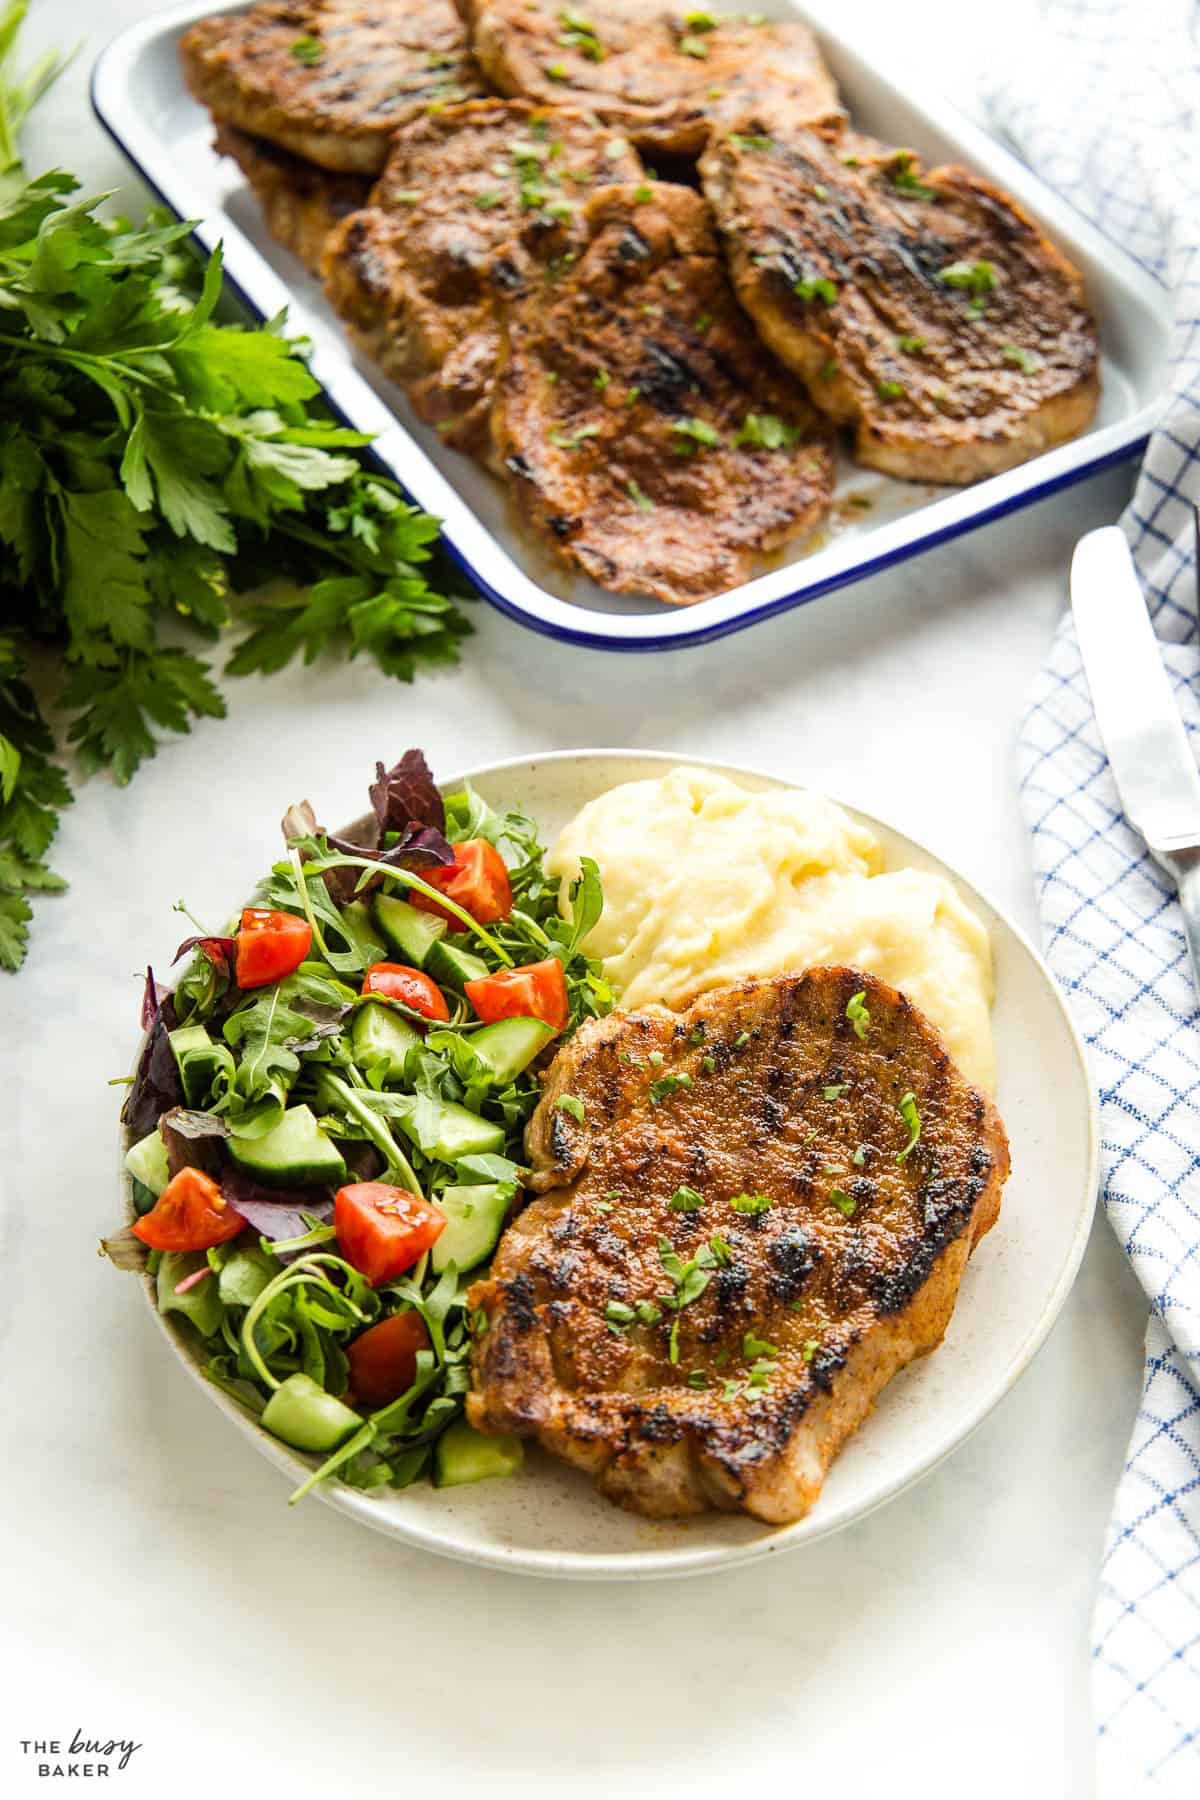 pork steak on white plate with salad and mashed potatoes